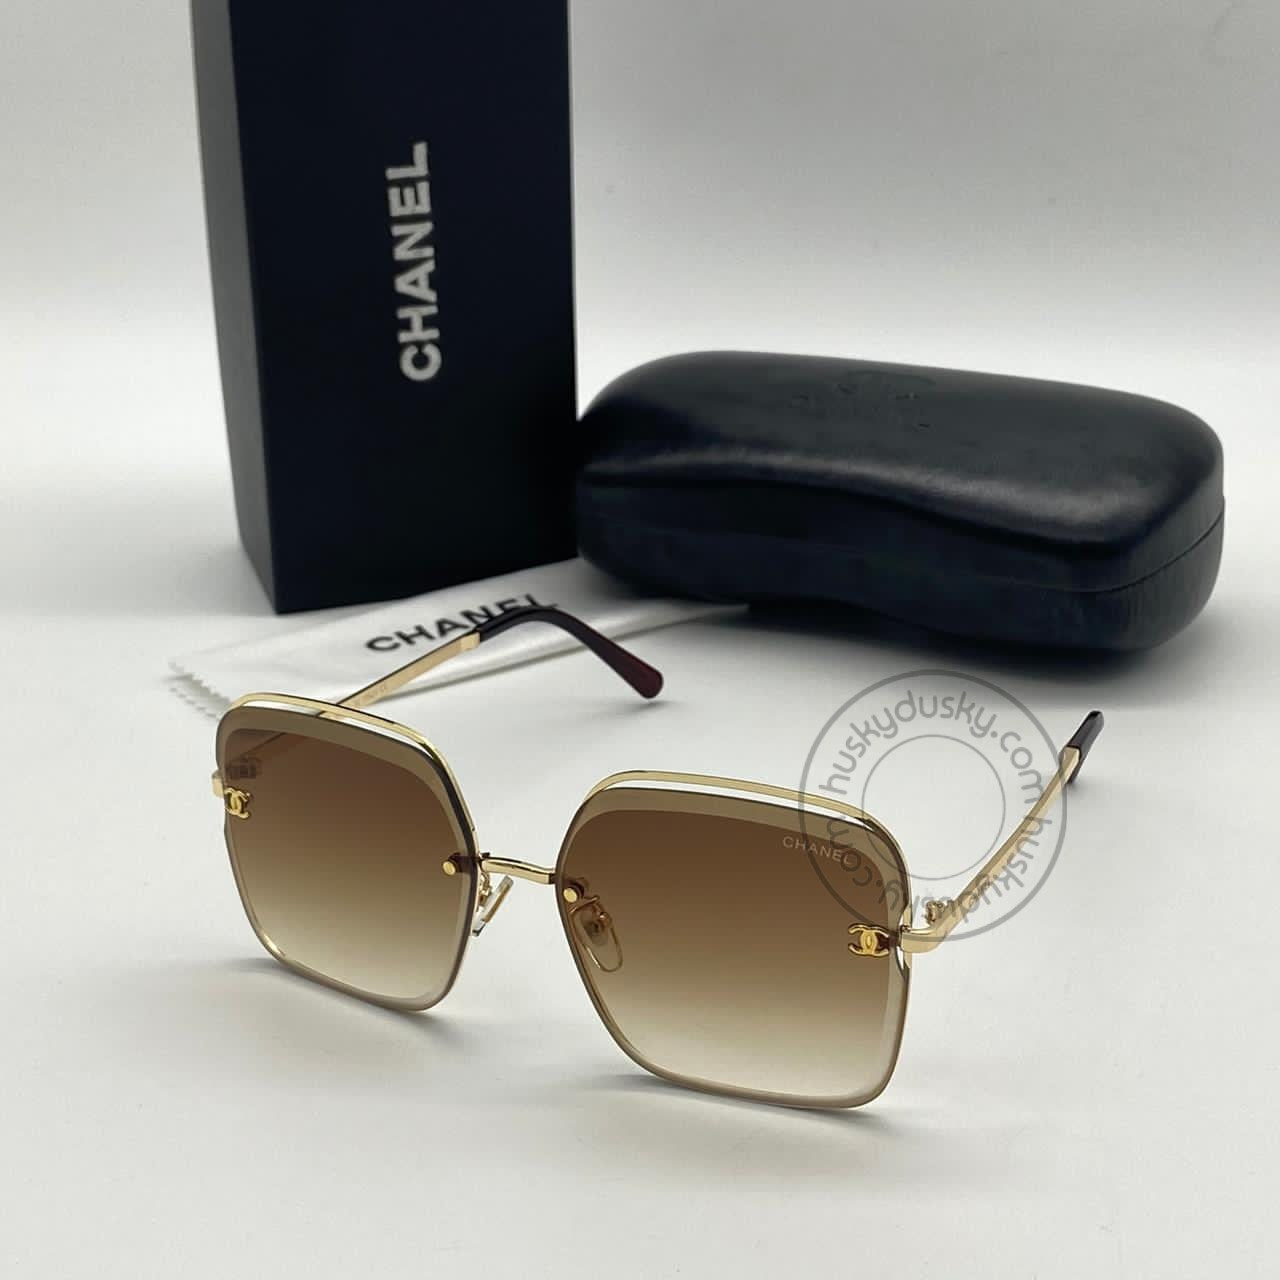 Chanel Branded Brown Shade Glass Men's Women's Sunglass For Man Woman or Girl CHA-283 Gold And Black Design Stick Gift Sunglass